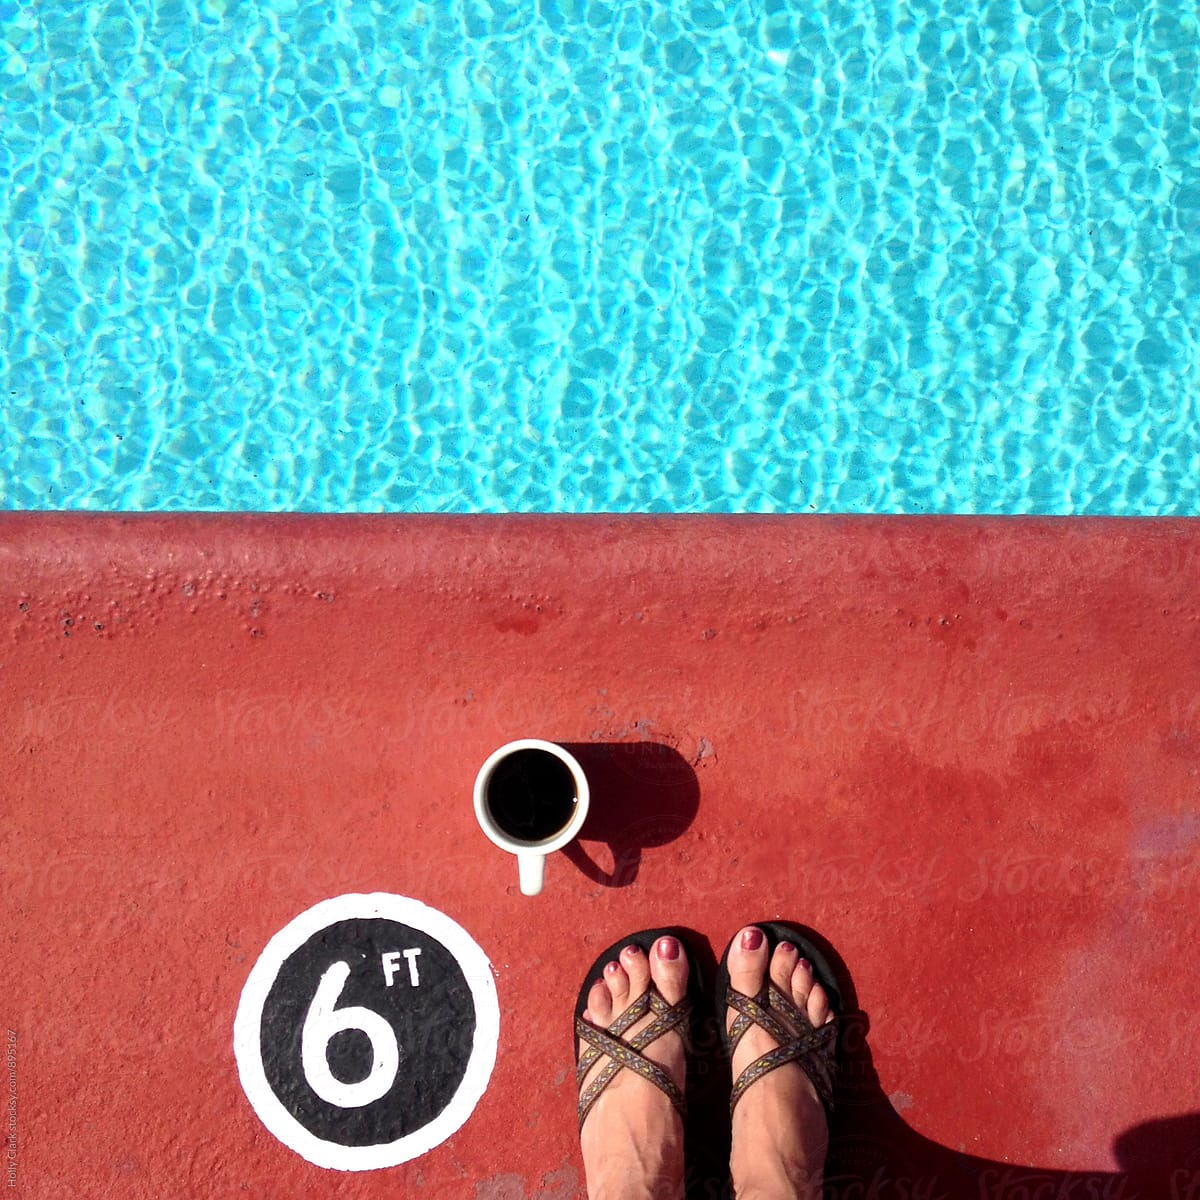 Women's feet on red concrete with a coffee cup at the pool